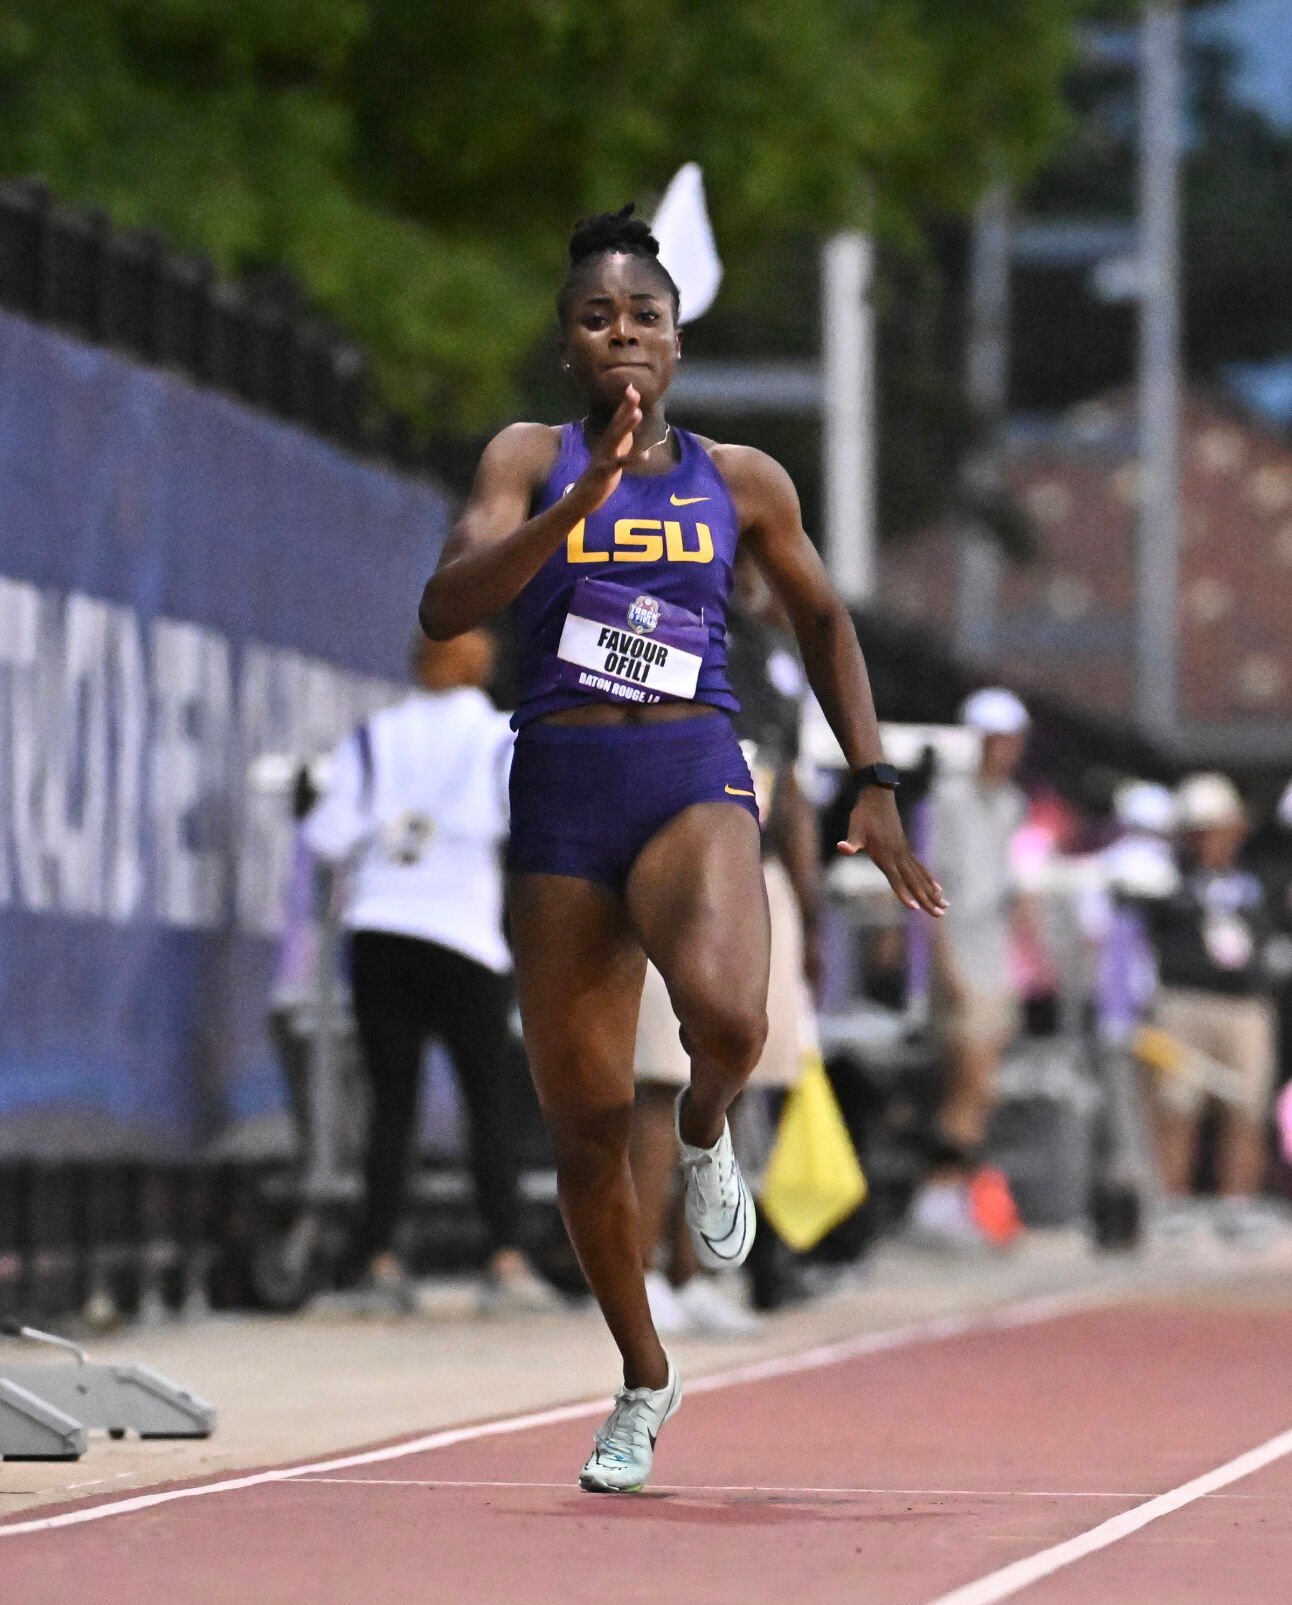 Photos Competition heats up in the SEC Outdoor Track and Field